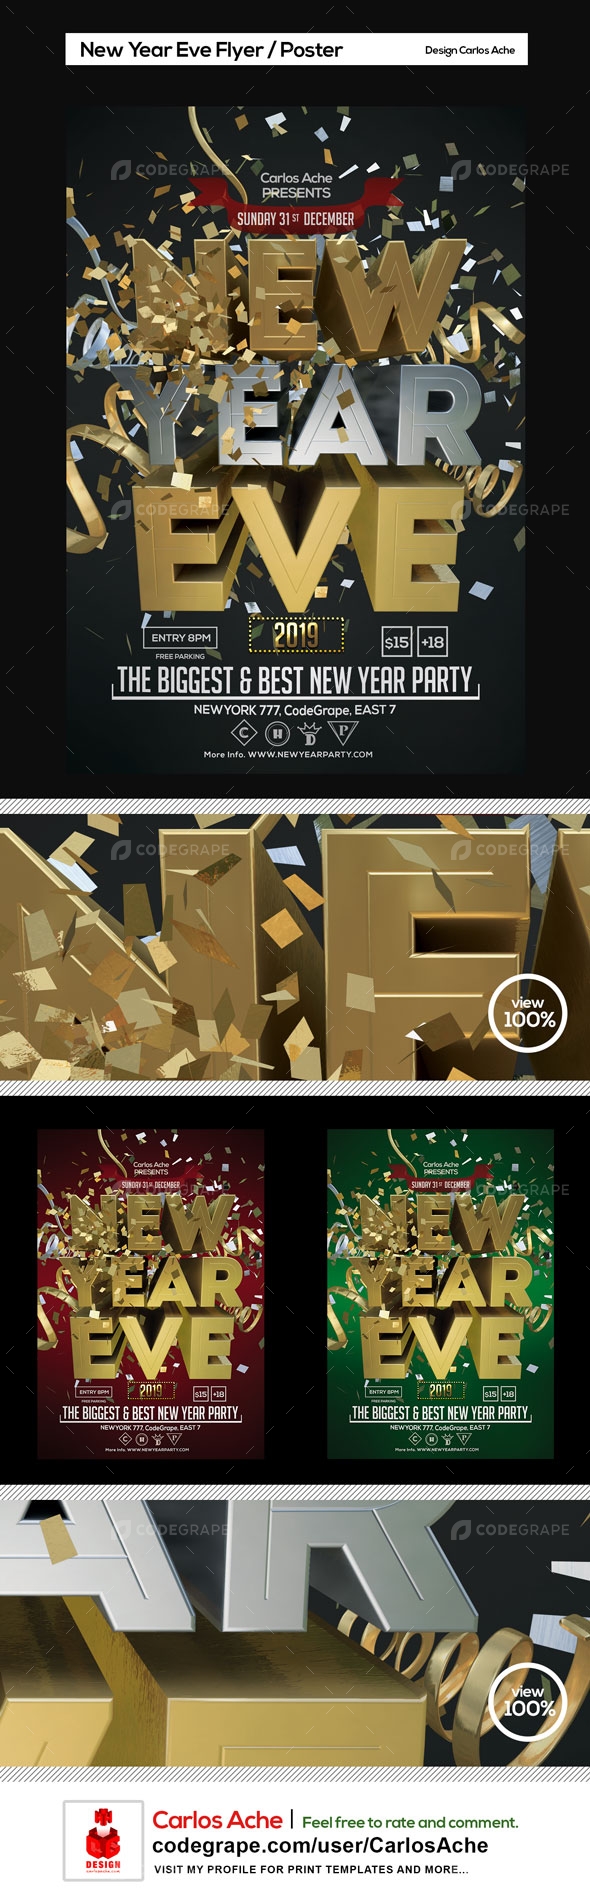 New Year Eve Flyer and Poster Template